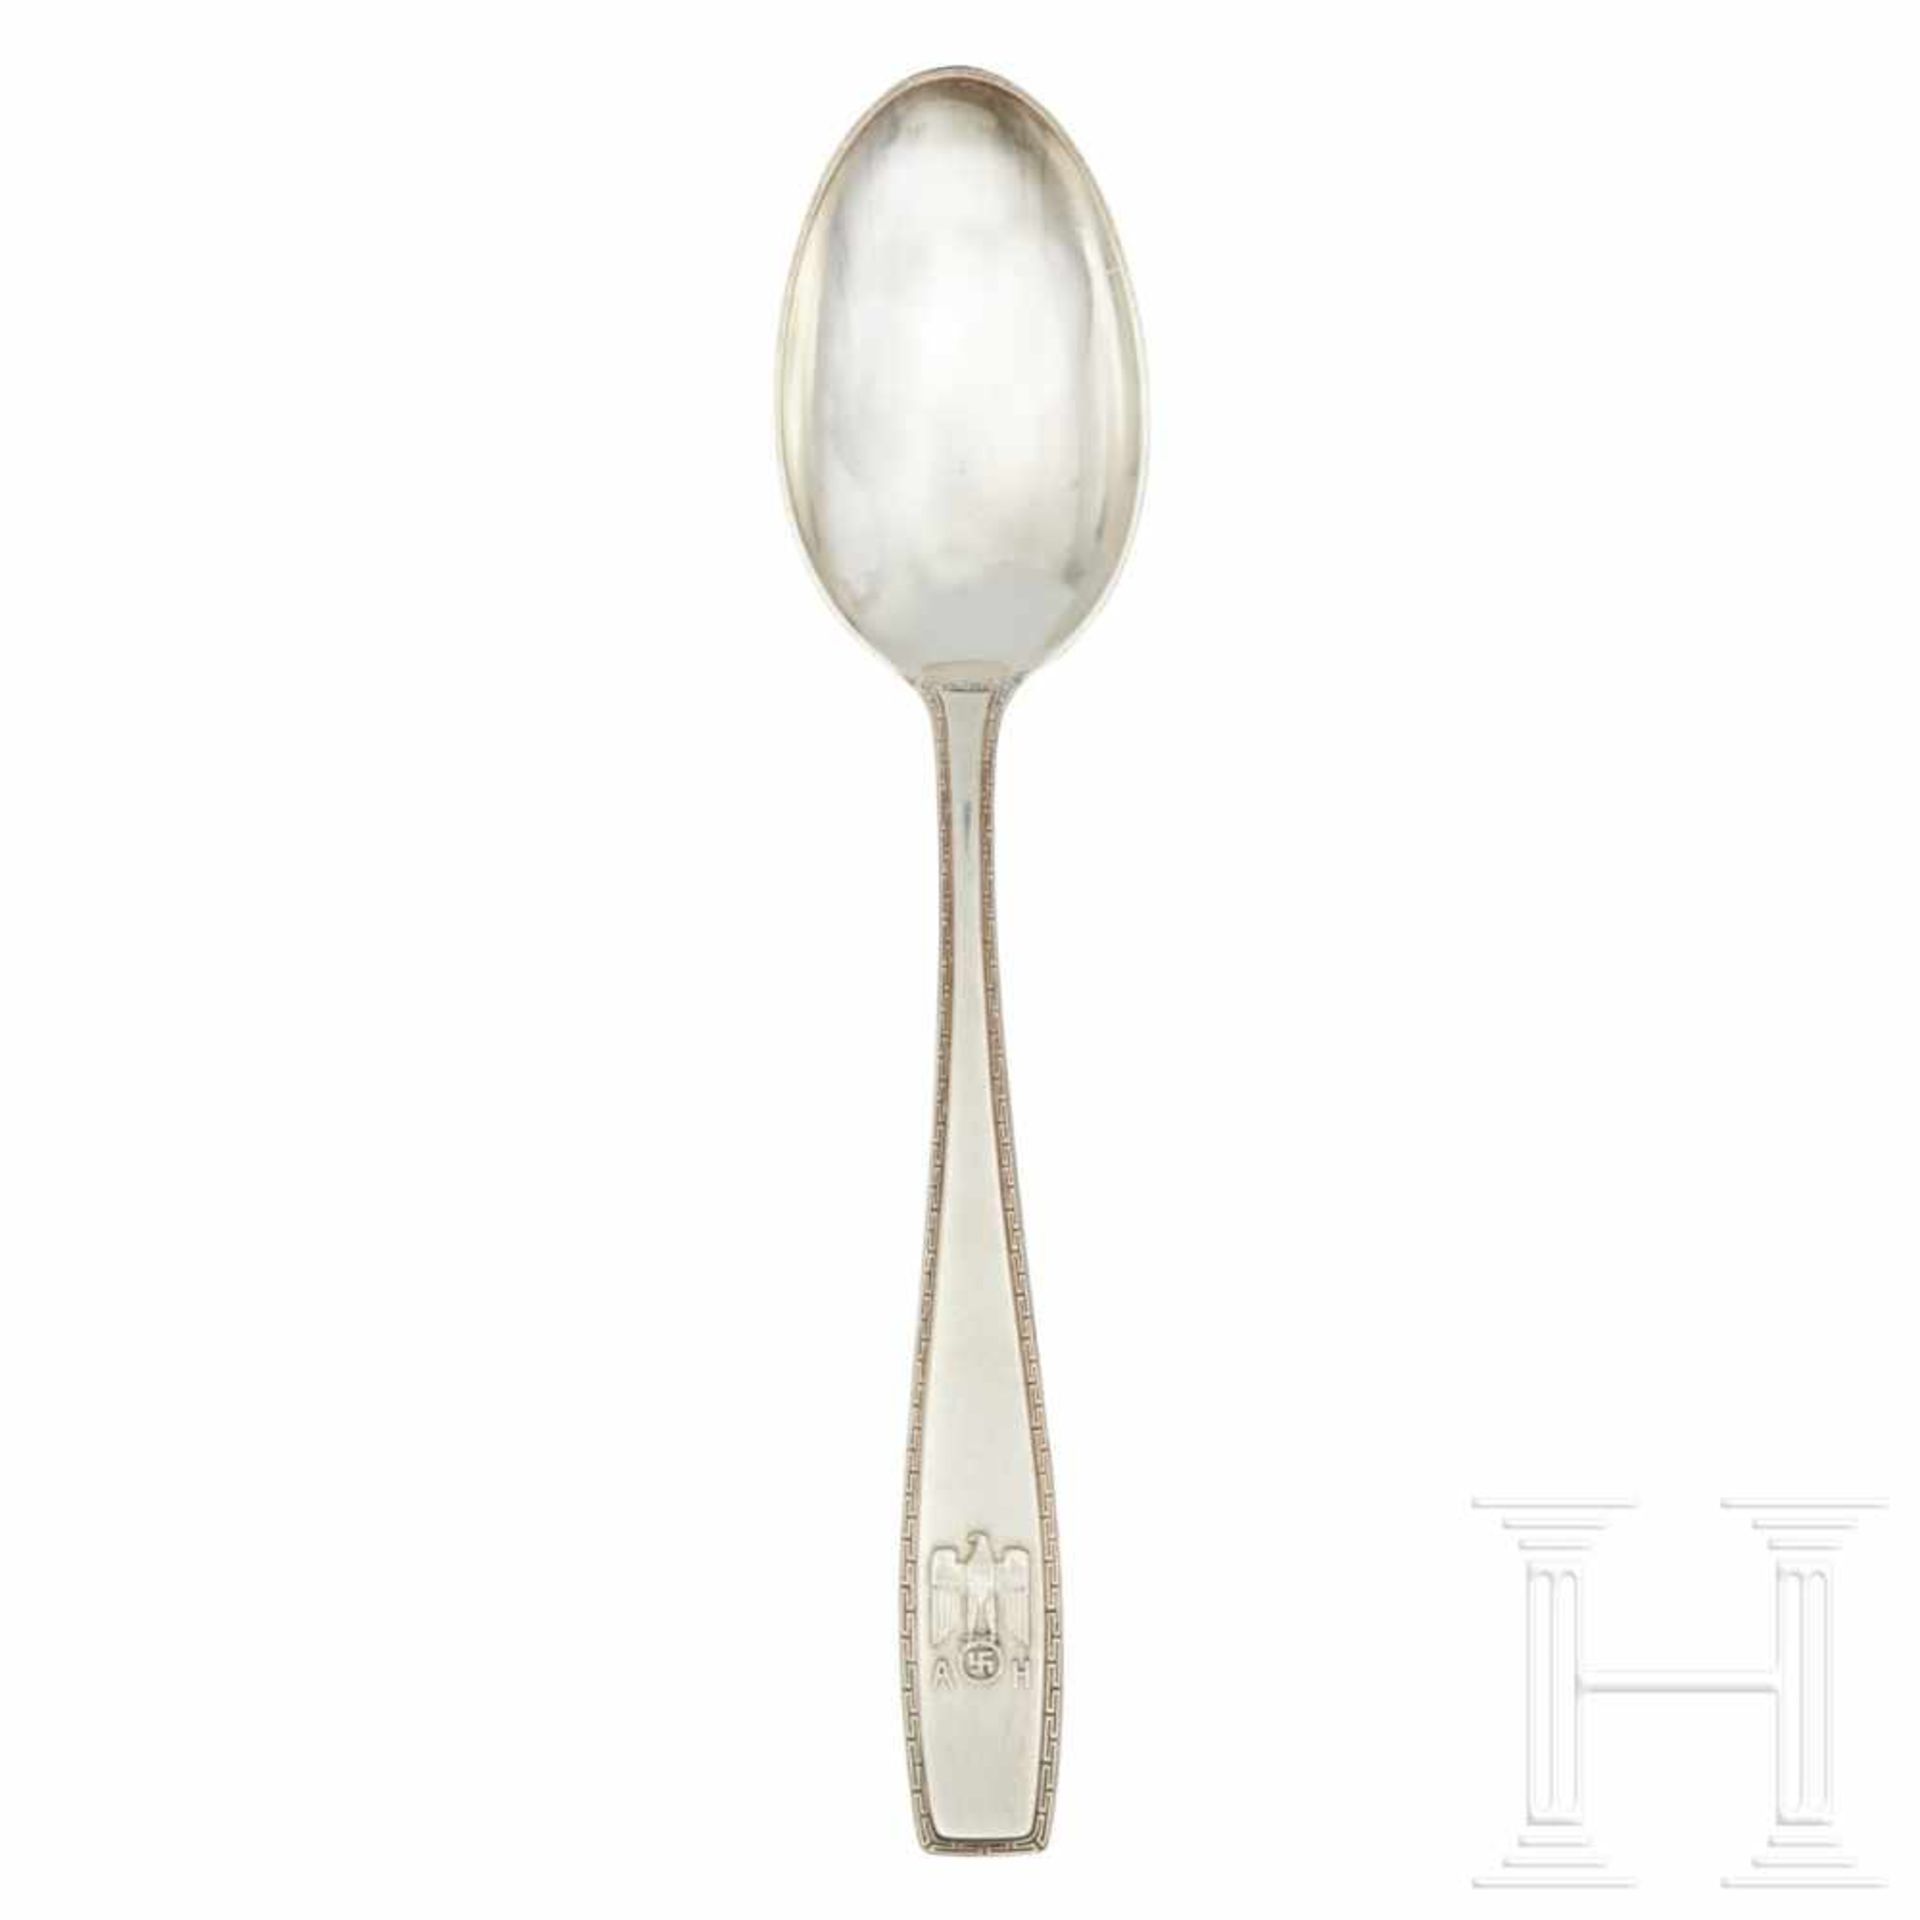 Adolf Hitler – a Dinner Spoon from his Personal Silver ServiceSo called “formal pattern” with raised